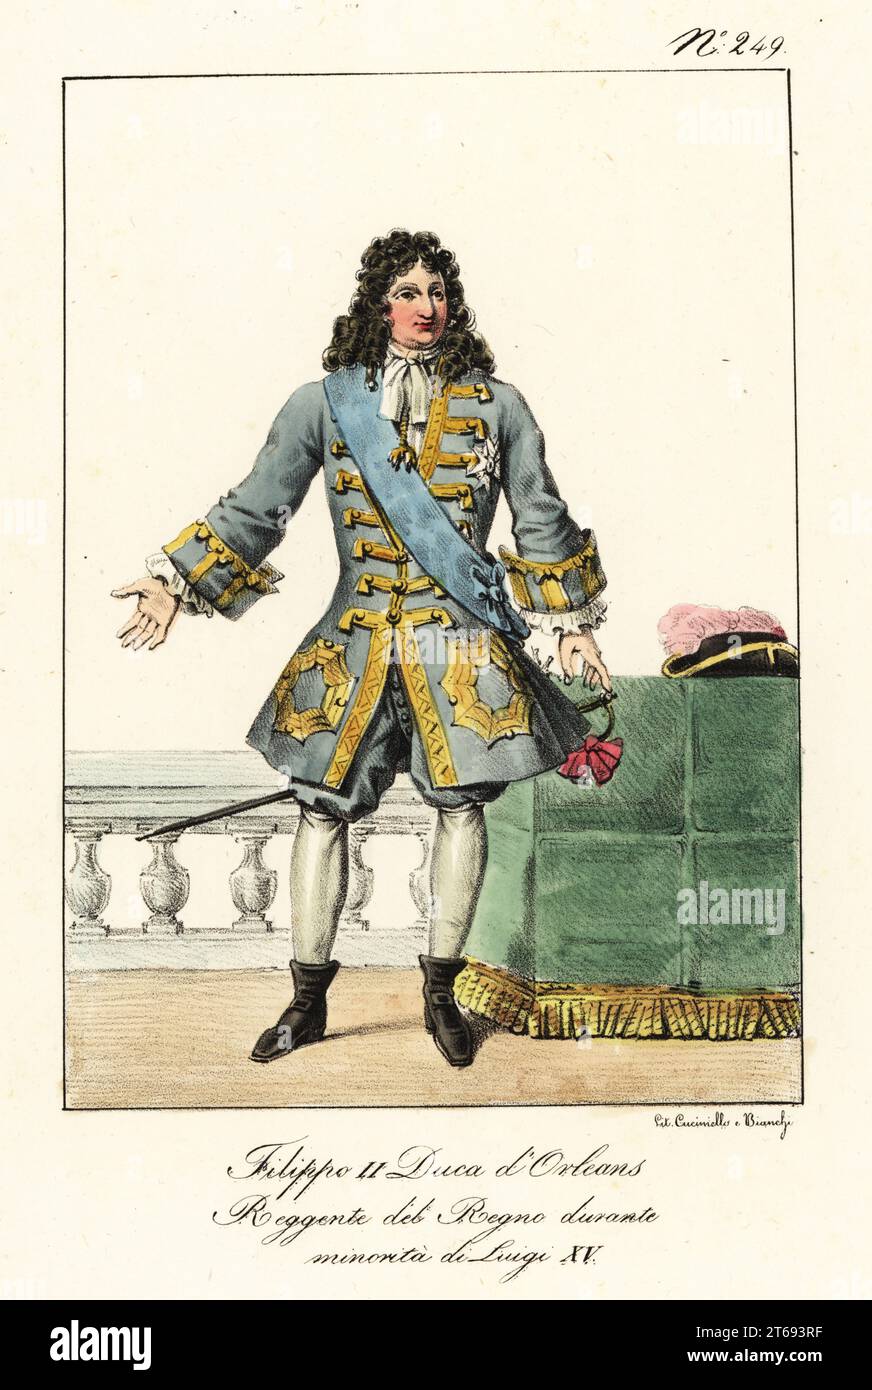 Philippe II, Duke of Orleans, 1674-1723, French royal, soldier, and statesman who served as Regent of France. In blue coat with gold frogging, cravatte, breeches, hose, bootlets, with court sword. Philippe II. Duc d'Orleans. Regent du Royaume pendant le minorite de Louis XV. Handcoloured lithograph by Lorenzo Bianchi and Domenico Cuciniello after Hippolyte Lecomte from Costumi civili e militari della monarchia francese dal 1200 al 1820, Naples, 1825. Italian edition of Lecomtes Civilian and military costumes of the French monarchy from 1200 to 1820. Stock Photo